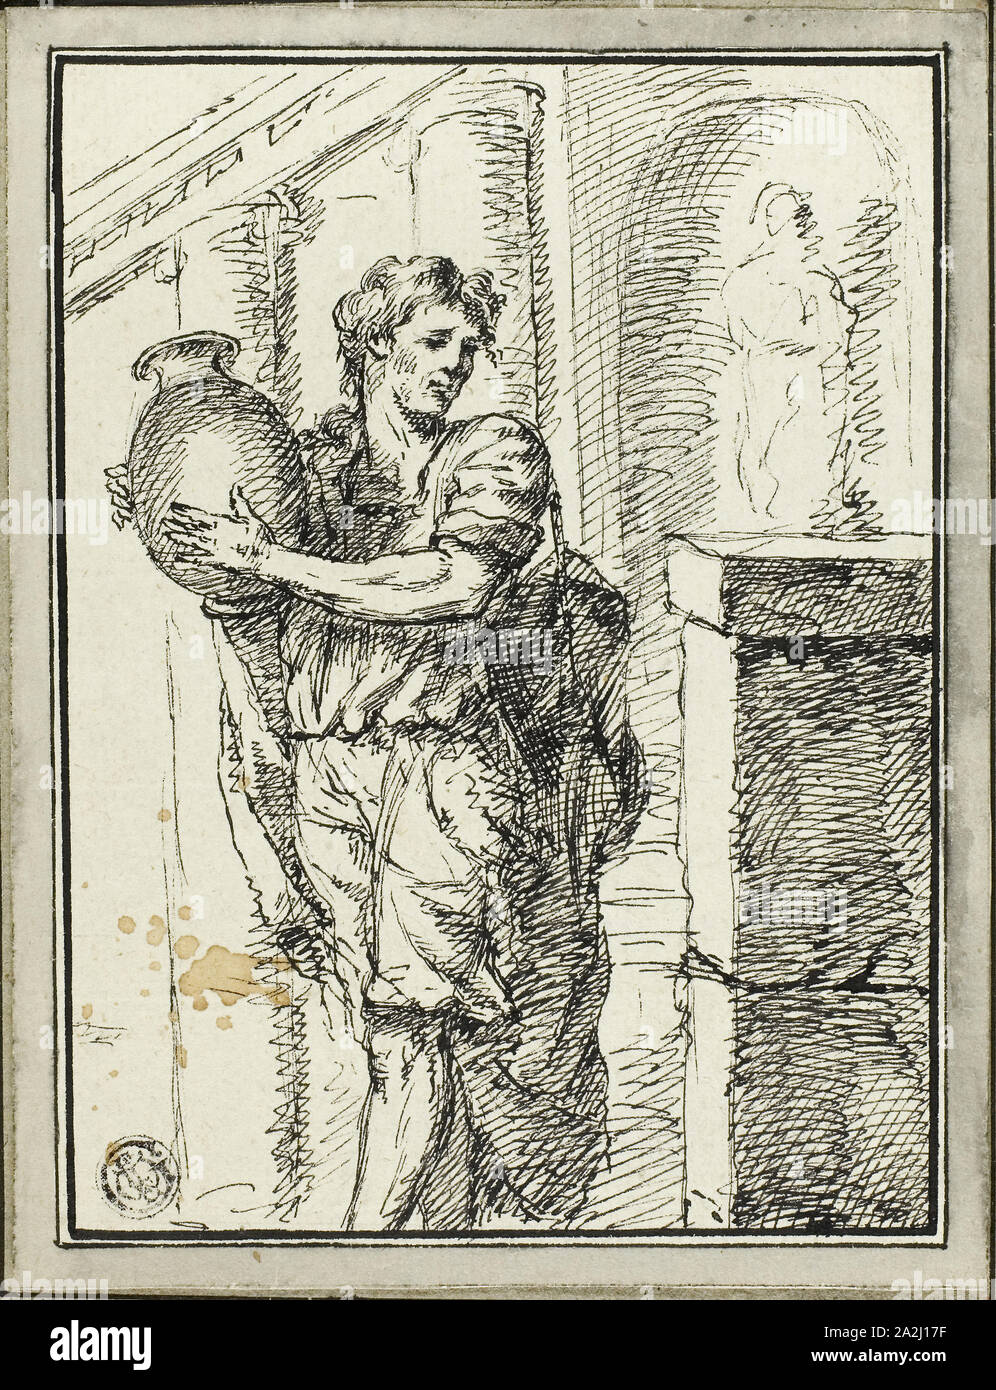 Man Holding Jar, 1785, David Pierre Giottino Humbert de Superville, Dutch, 1770-1849, Holland, Pen and black ink on ivory laid paper, tipped onto gray laid paper, 156 x 120 mm Stock Photo